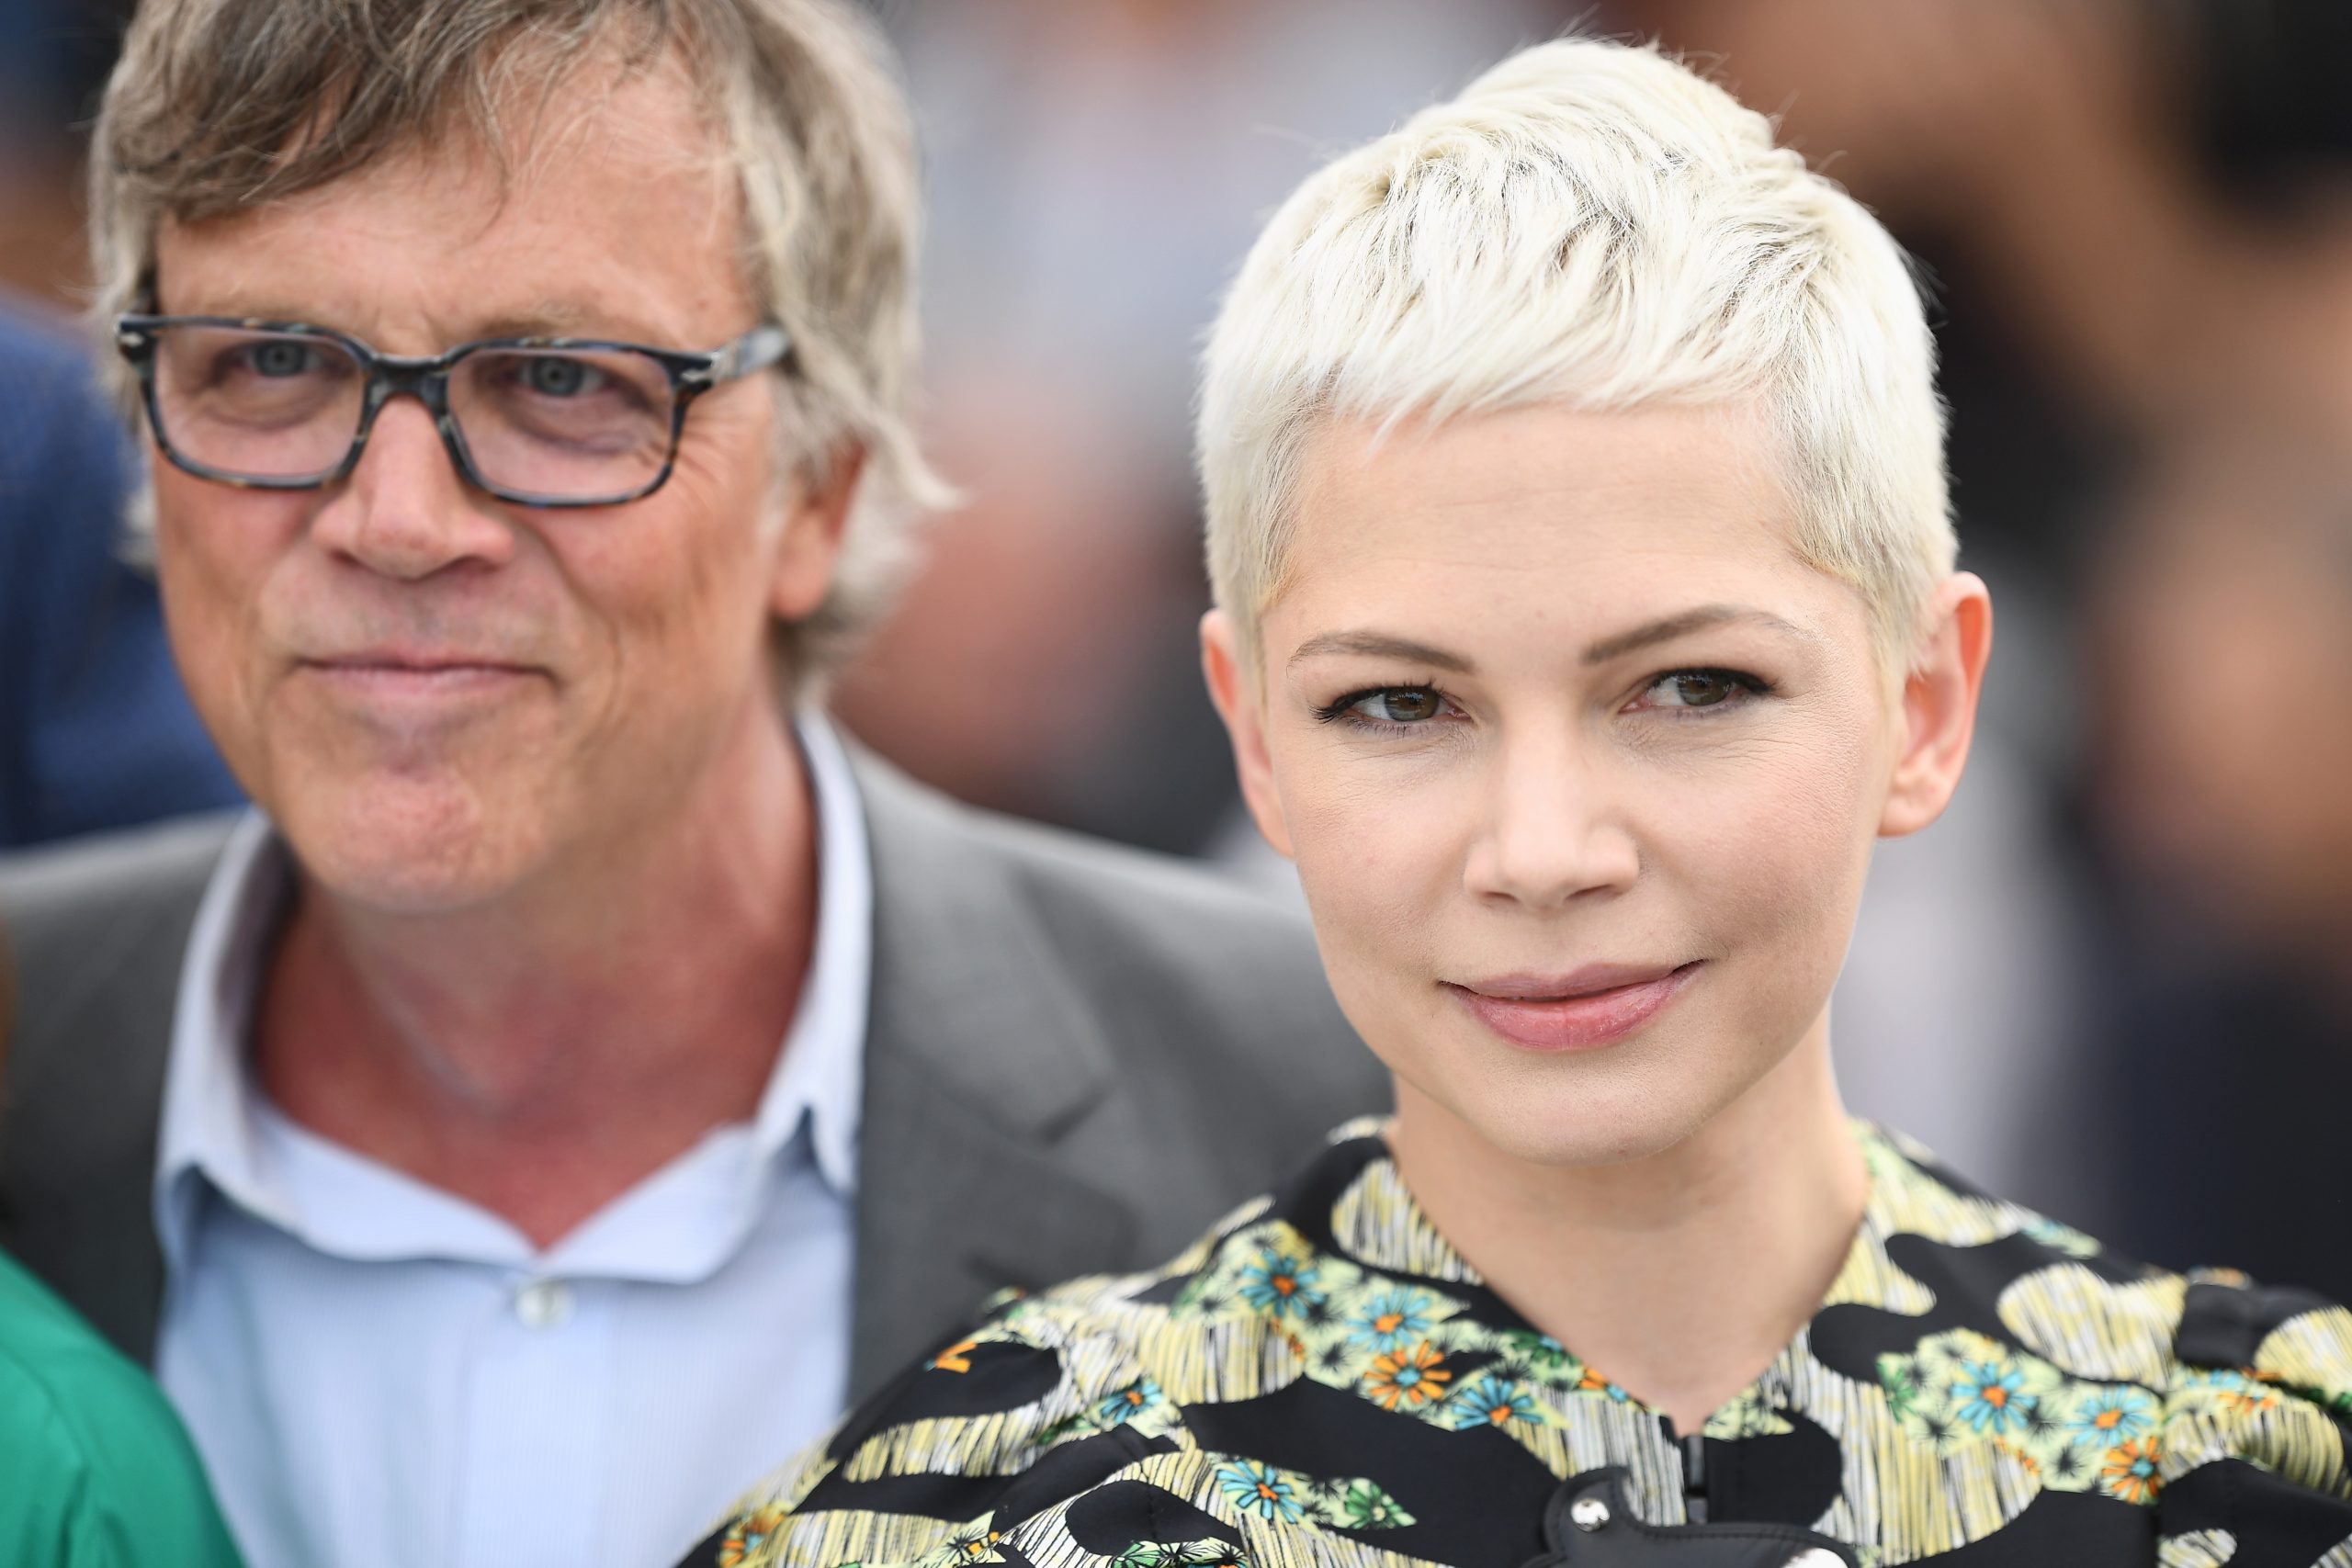 Todd Haynes Open to Reviving Scrapped Peggy Lee Biopic with Michelle Williams: ‘The Interest Hasn’t Gone Away’